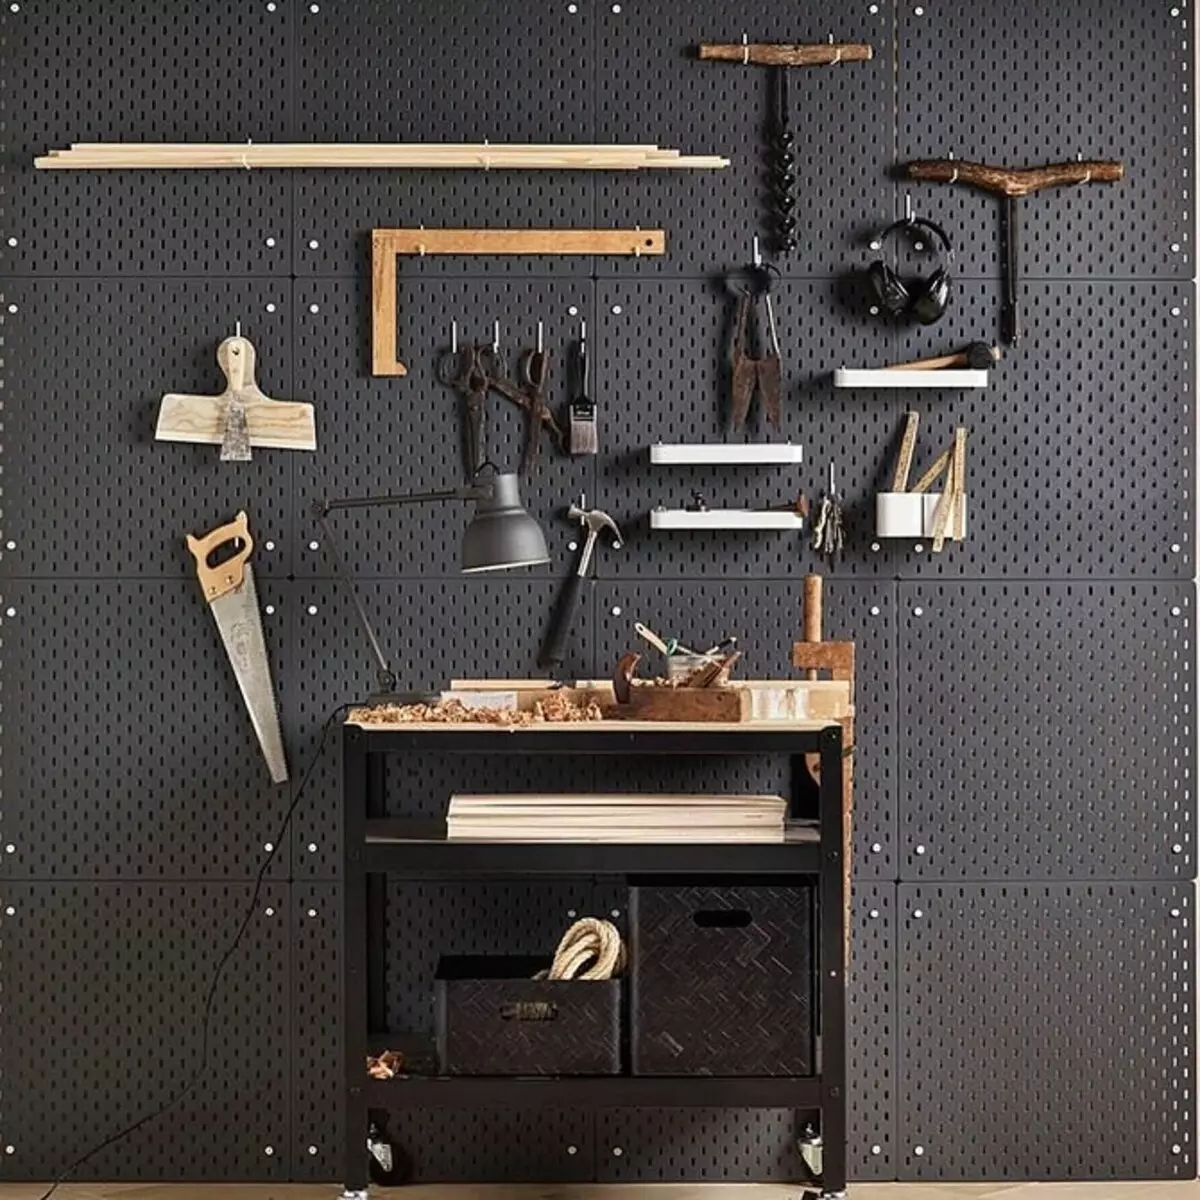 Pegboard in the interior: 19 ways originally use perforated board 8416_21